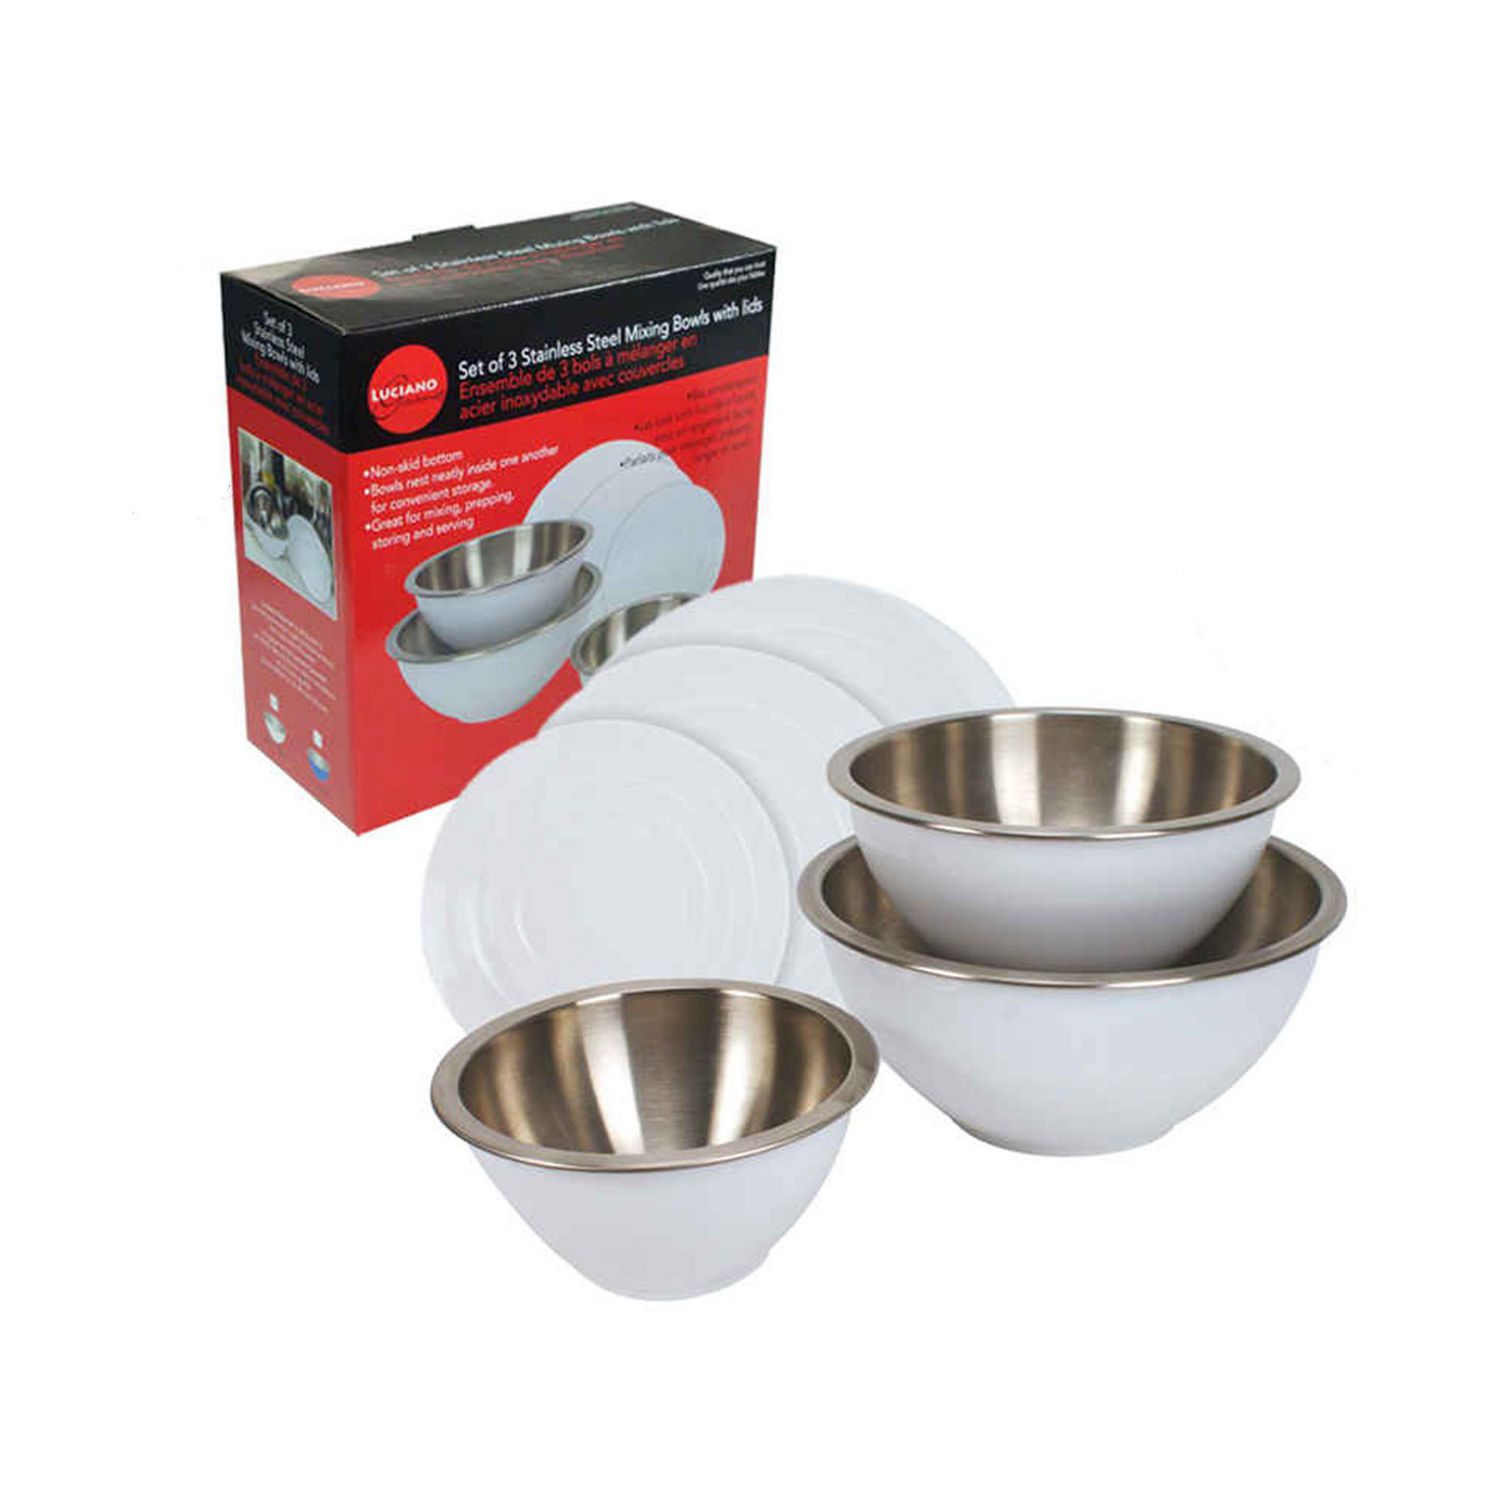 Luciano Housewares 3-Piece Stainless Steel Mixing Bowl Set with Lids 3-piece Stainless Steel Mixing Bowl Set With Lids